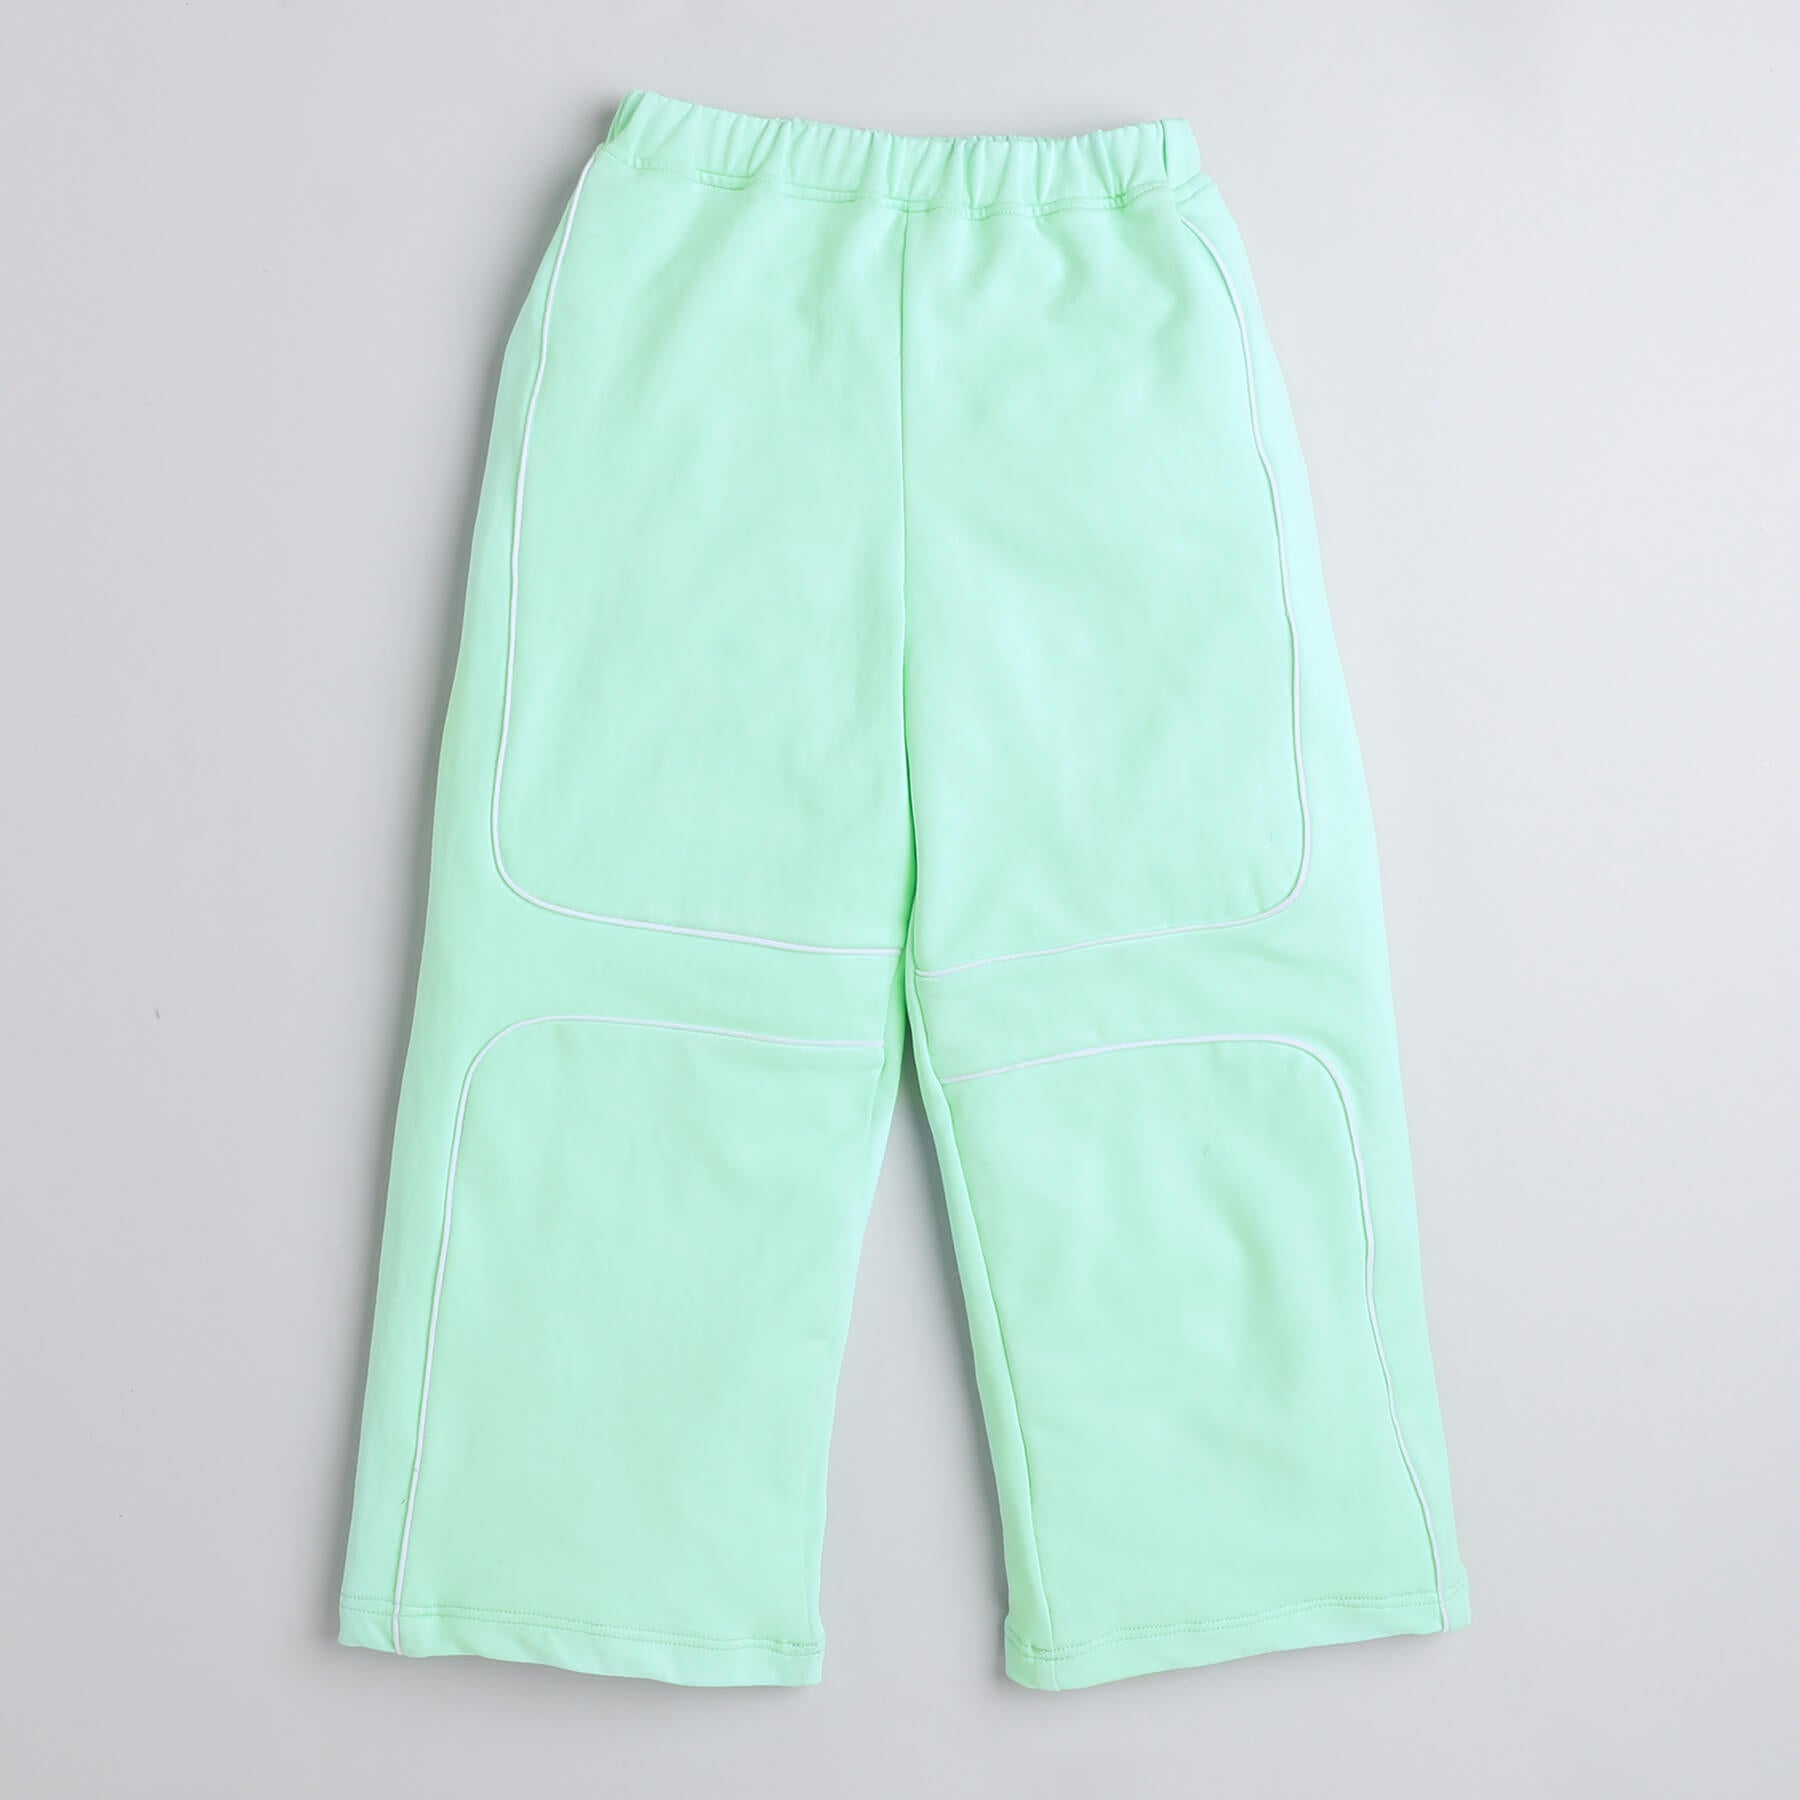 Taffykids waist elastic detail crop top and pipping detail pant set-Turquoise Green